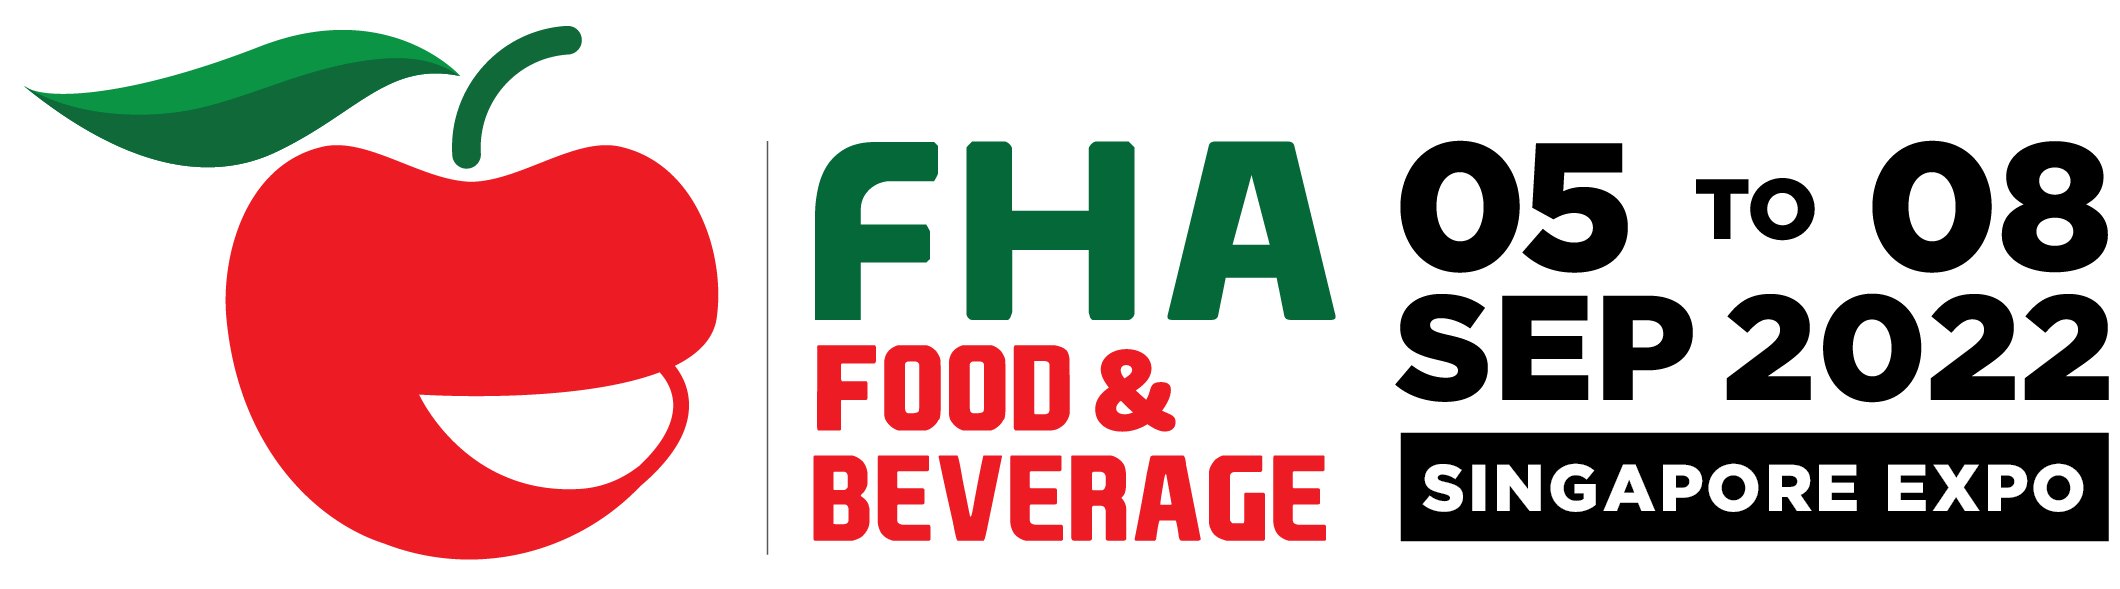 FHA Food and Beverage Expo Singapore 2022